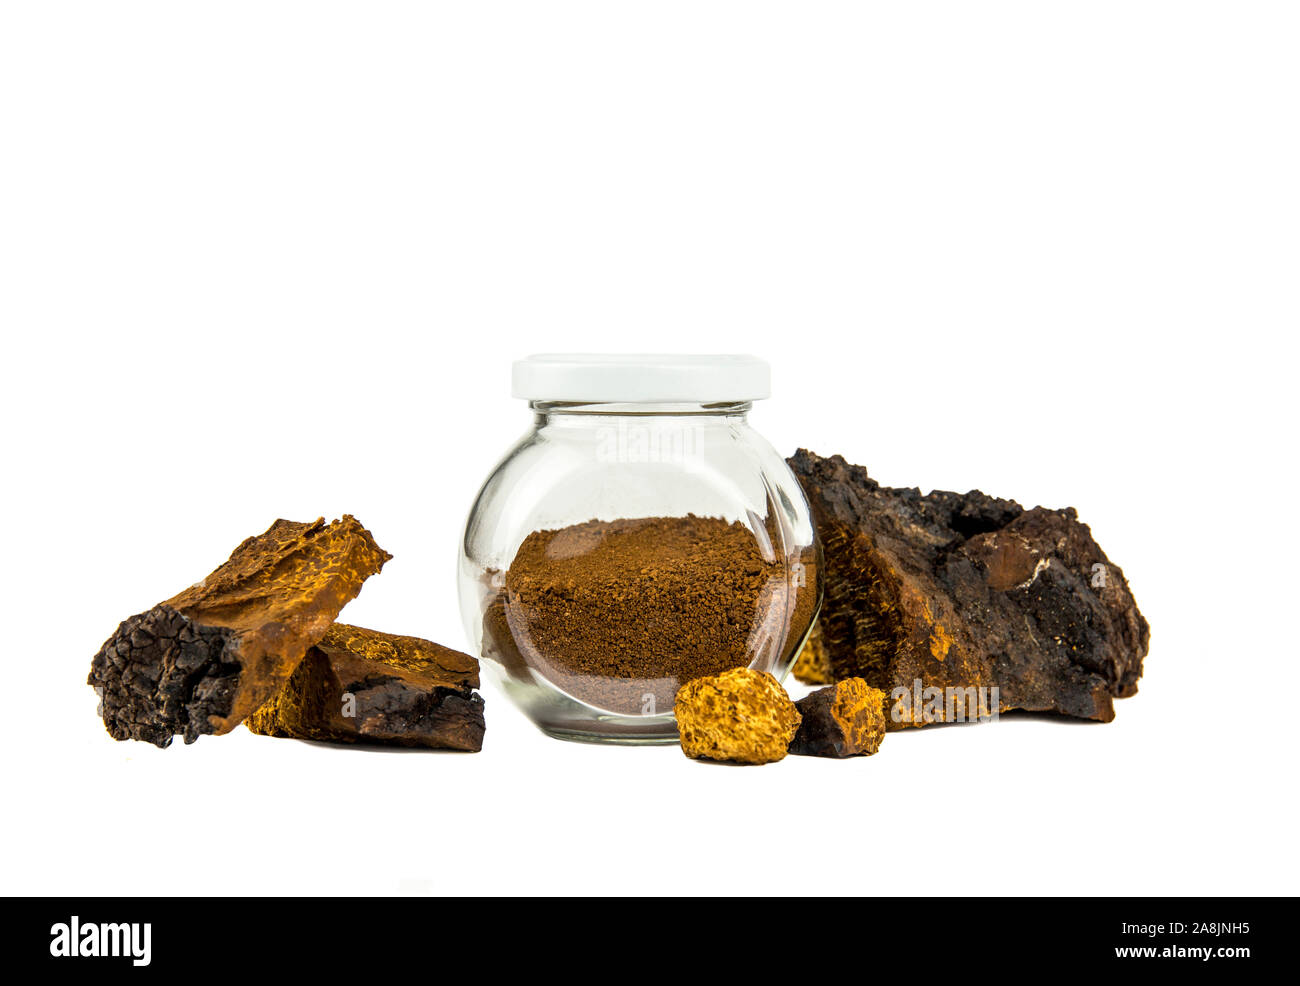 Healthy pure wild natural chaga mushroom, Inonotus obliquus powder in glass jar for making tea and coffee and pieces of mushroom isolated on white bac Stock Photo